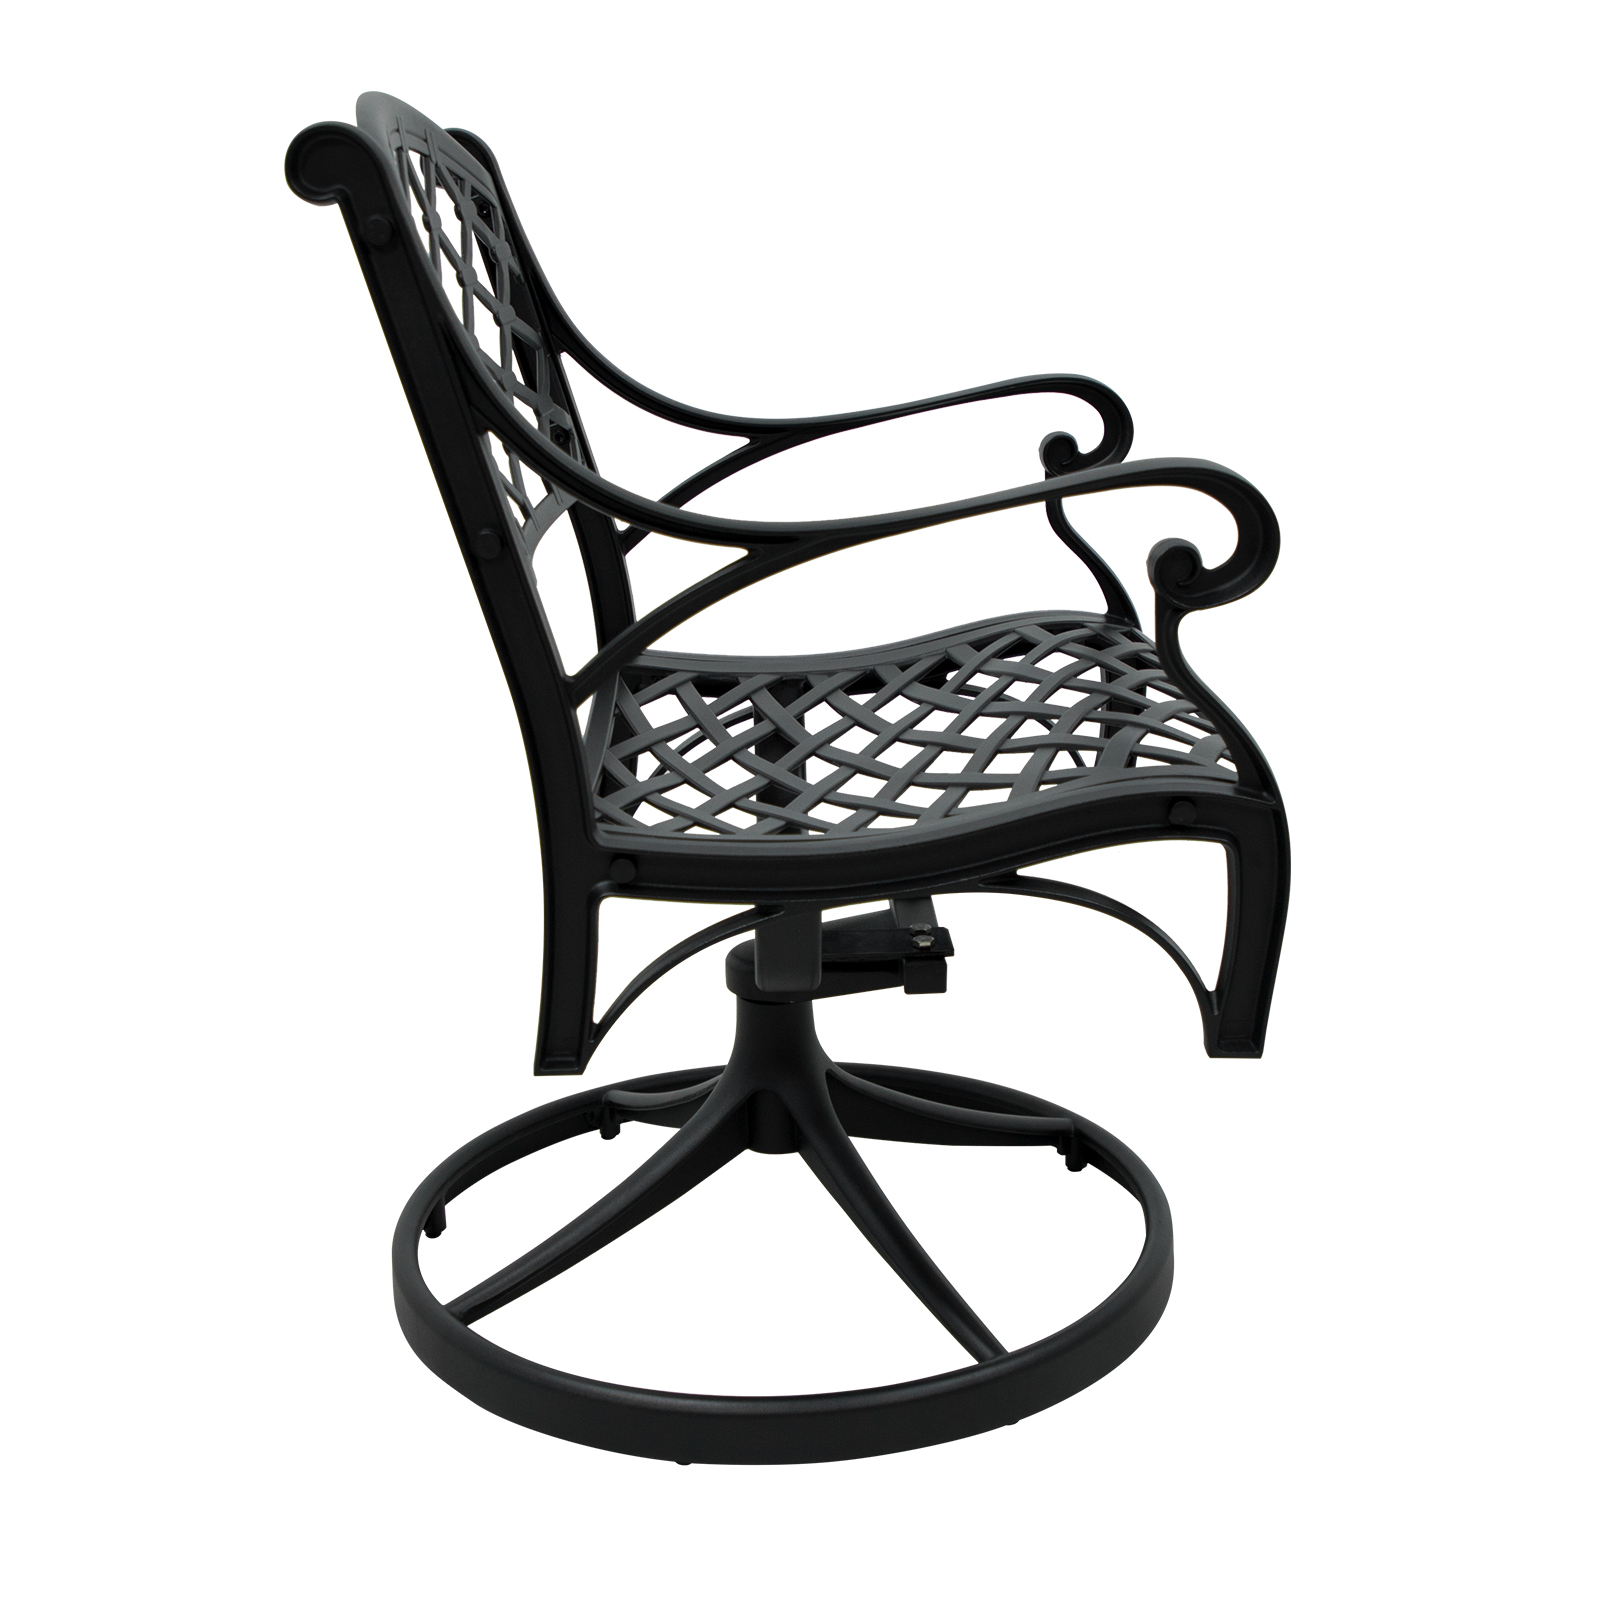 Outdoor Patio Swivel Dining Chair,Swivel Rocker Chairs with High Back Cast Aluminum Frame, Weather Resistant Metal Furniture for Lawn Backyard, Outdoor Dining Rocker Chair for Garden Backyard, Black - image 5 of 7